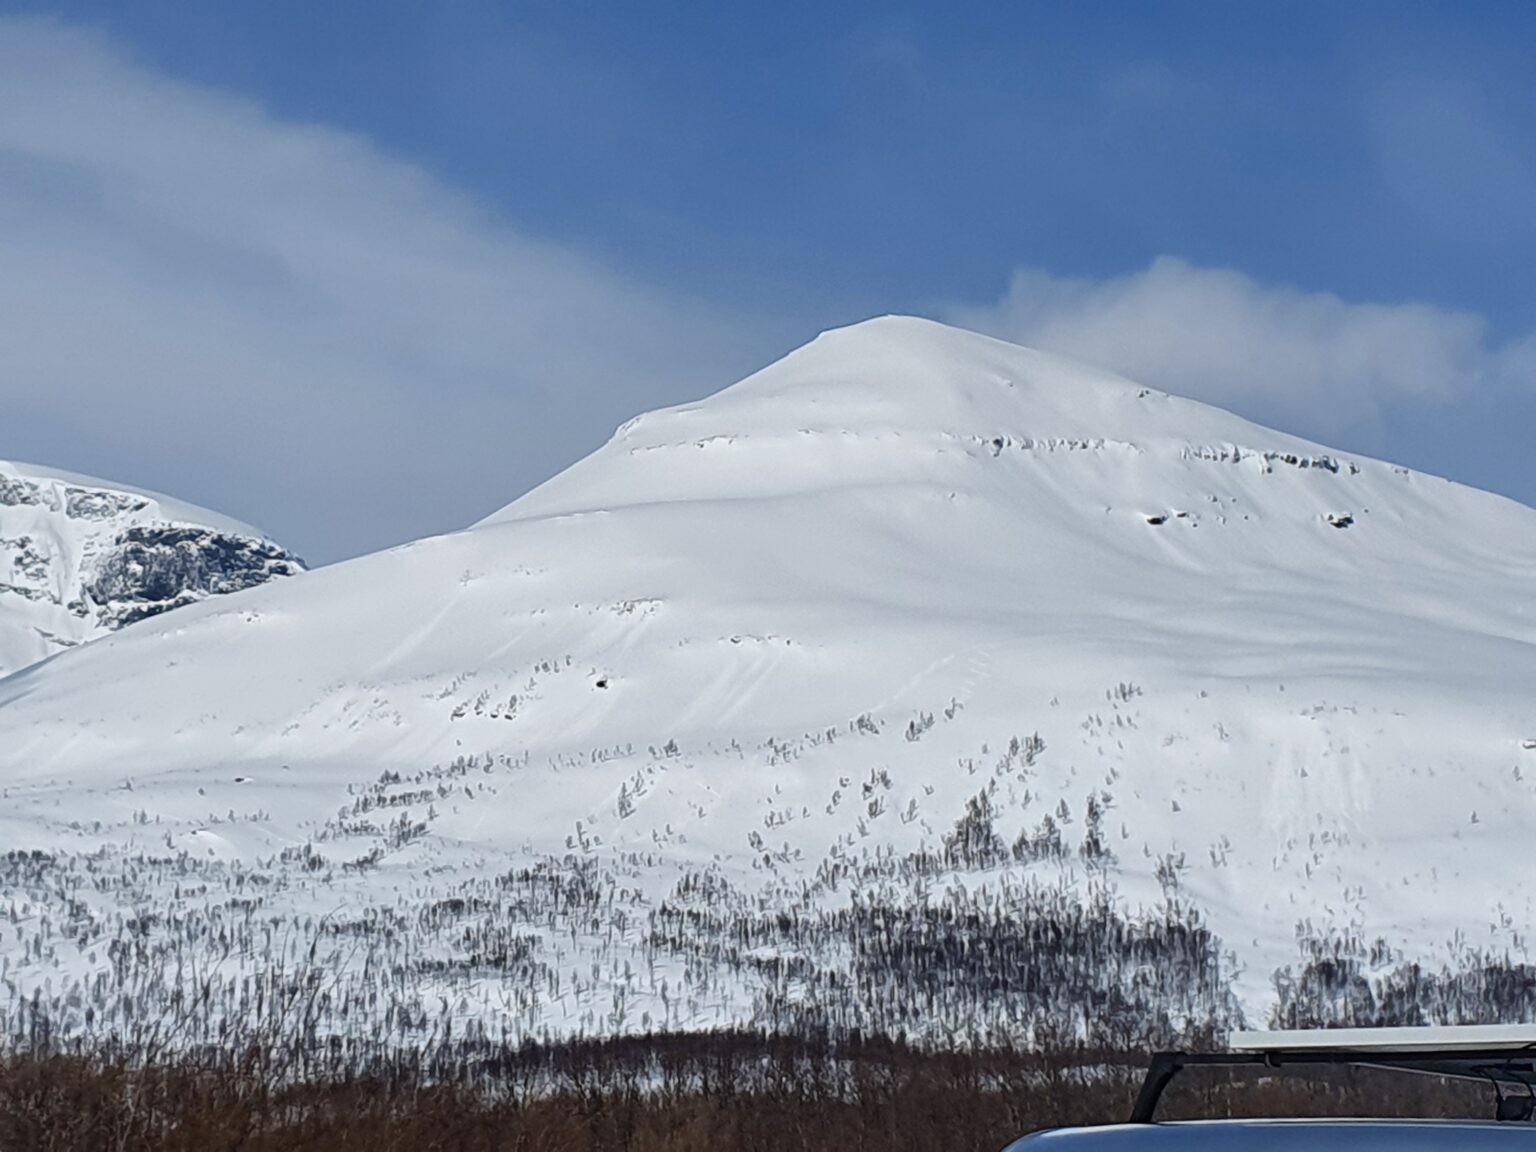 Looking at the South face of Sjufjellet from the Tamokdalen valley in Northern Norway